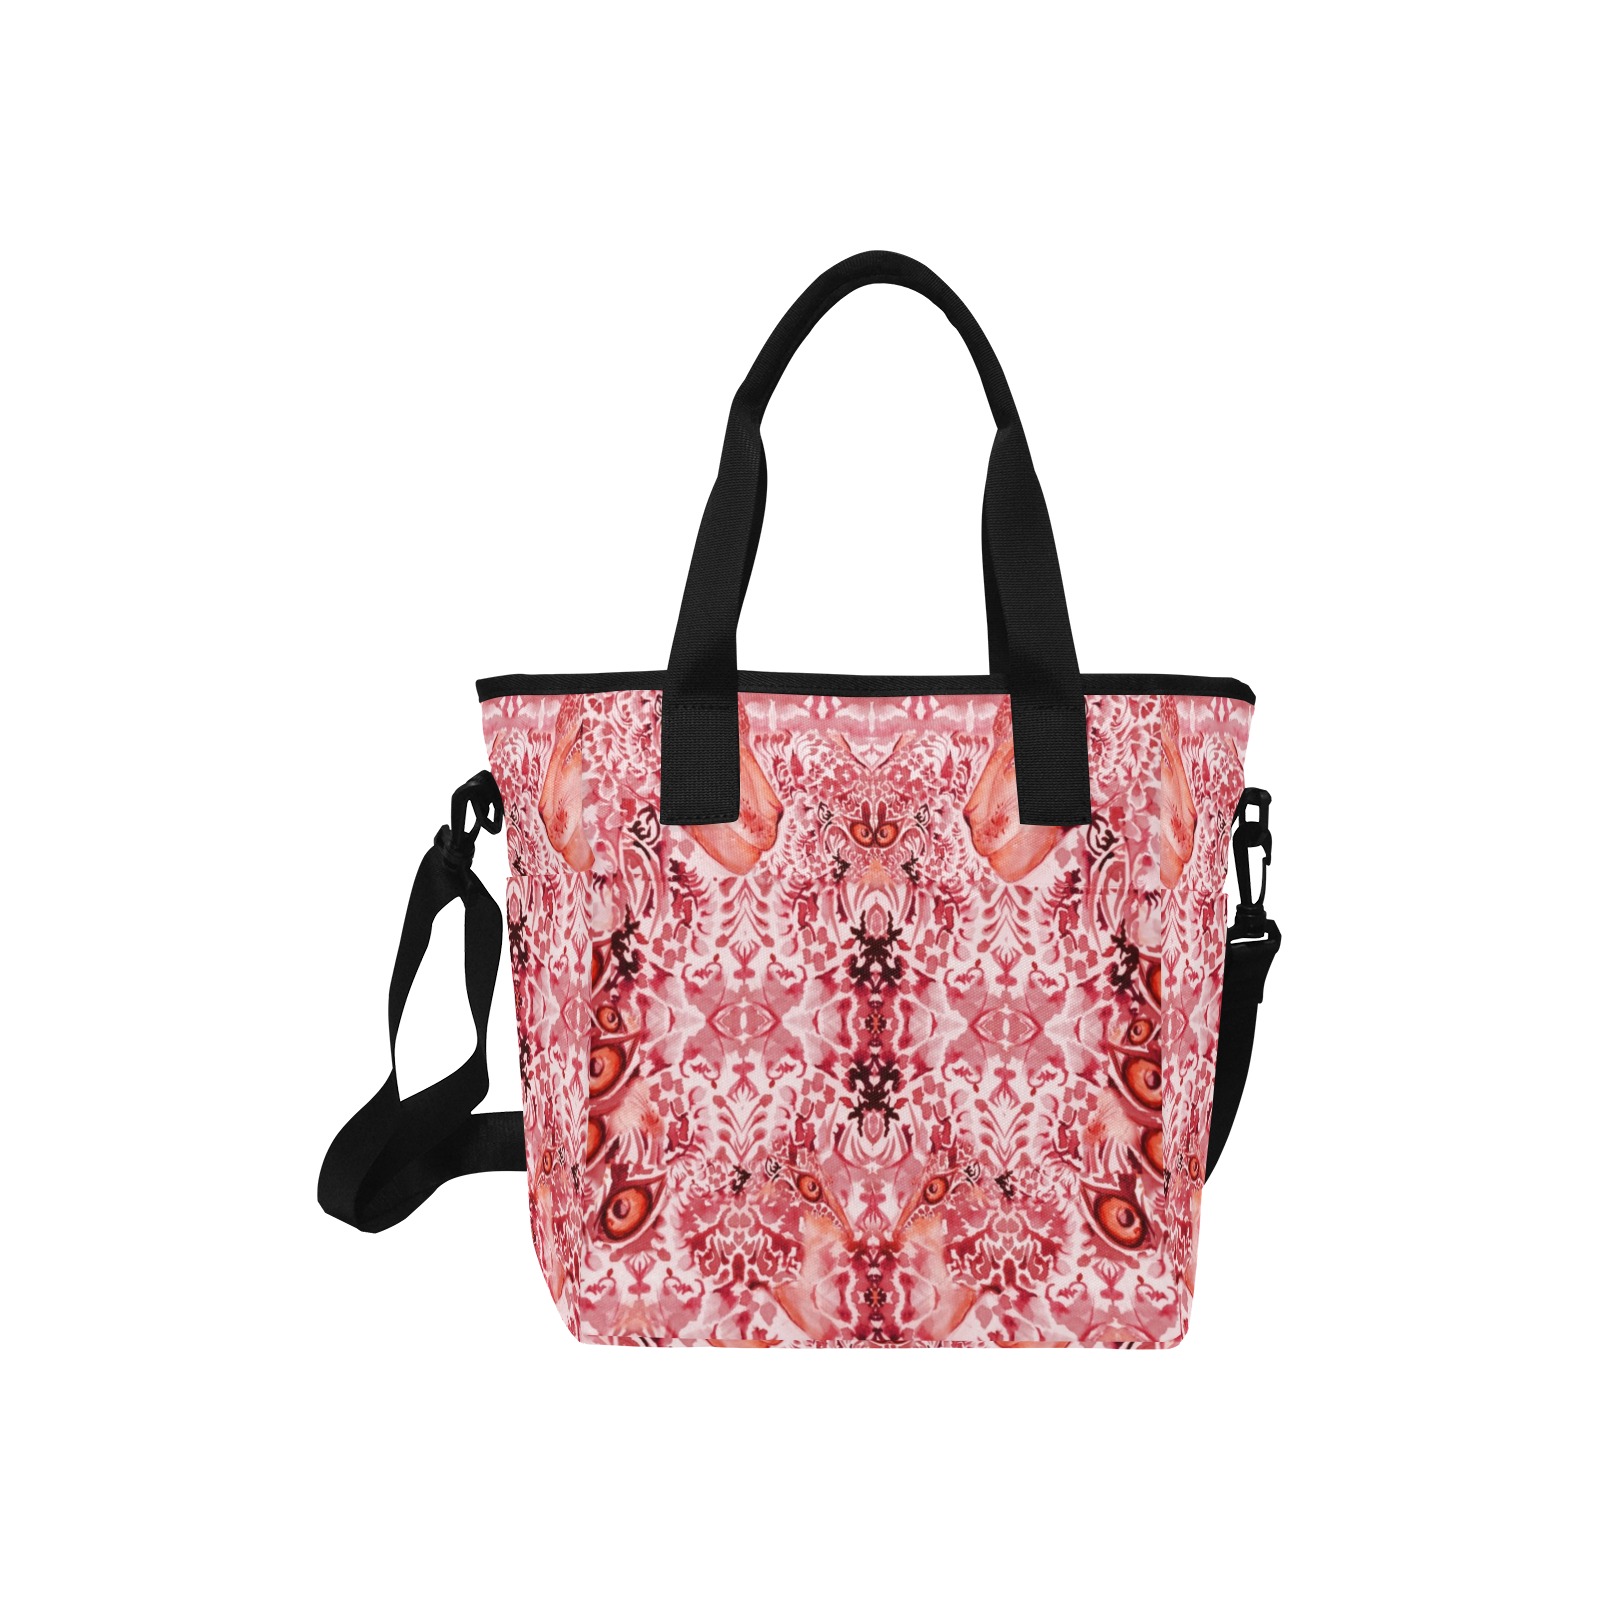 Nidhi December 2014-pattern 4-red-44x55 inches Tote Bag with Shoulder Strap (Model 1724)